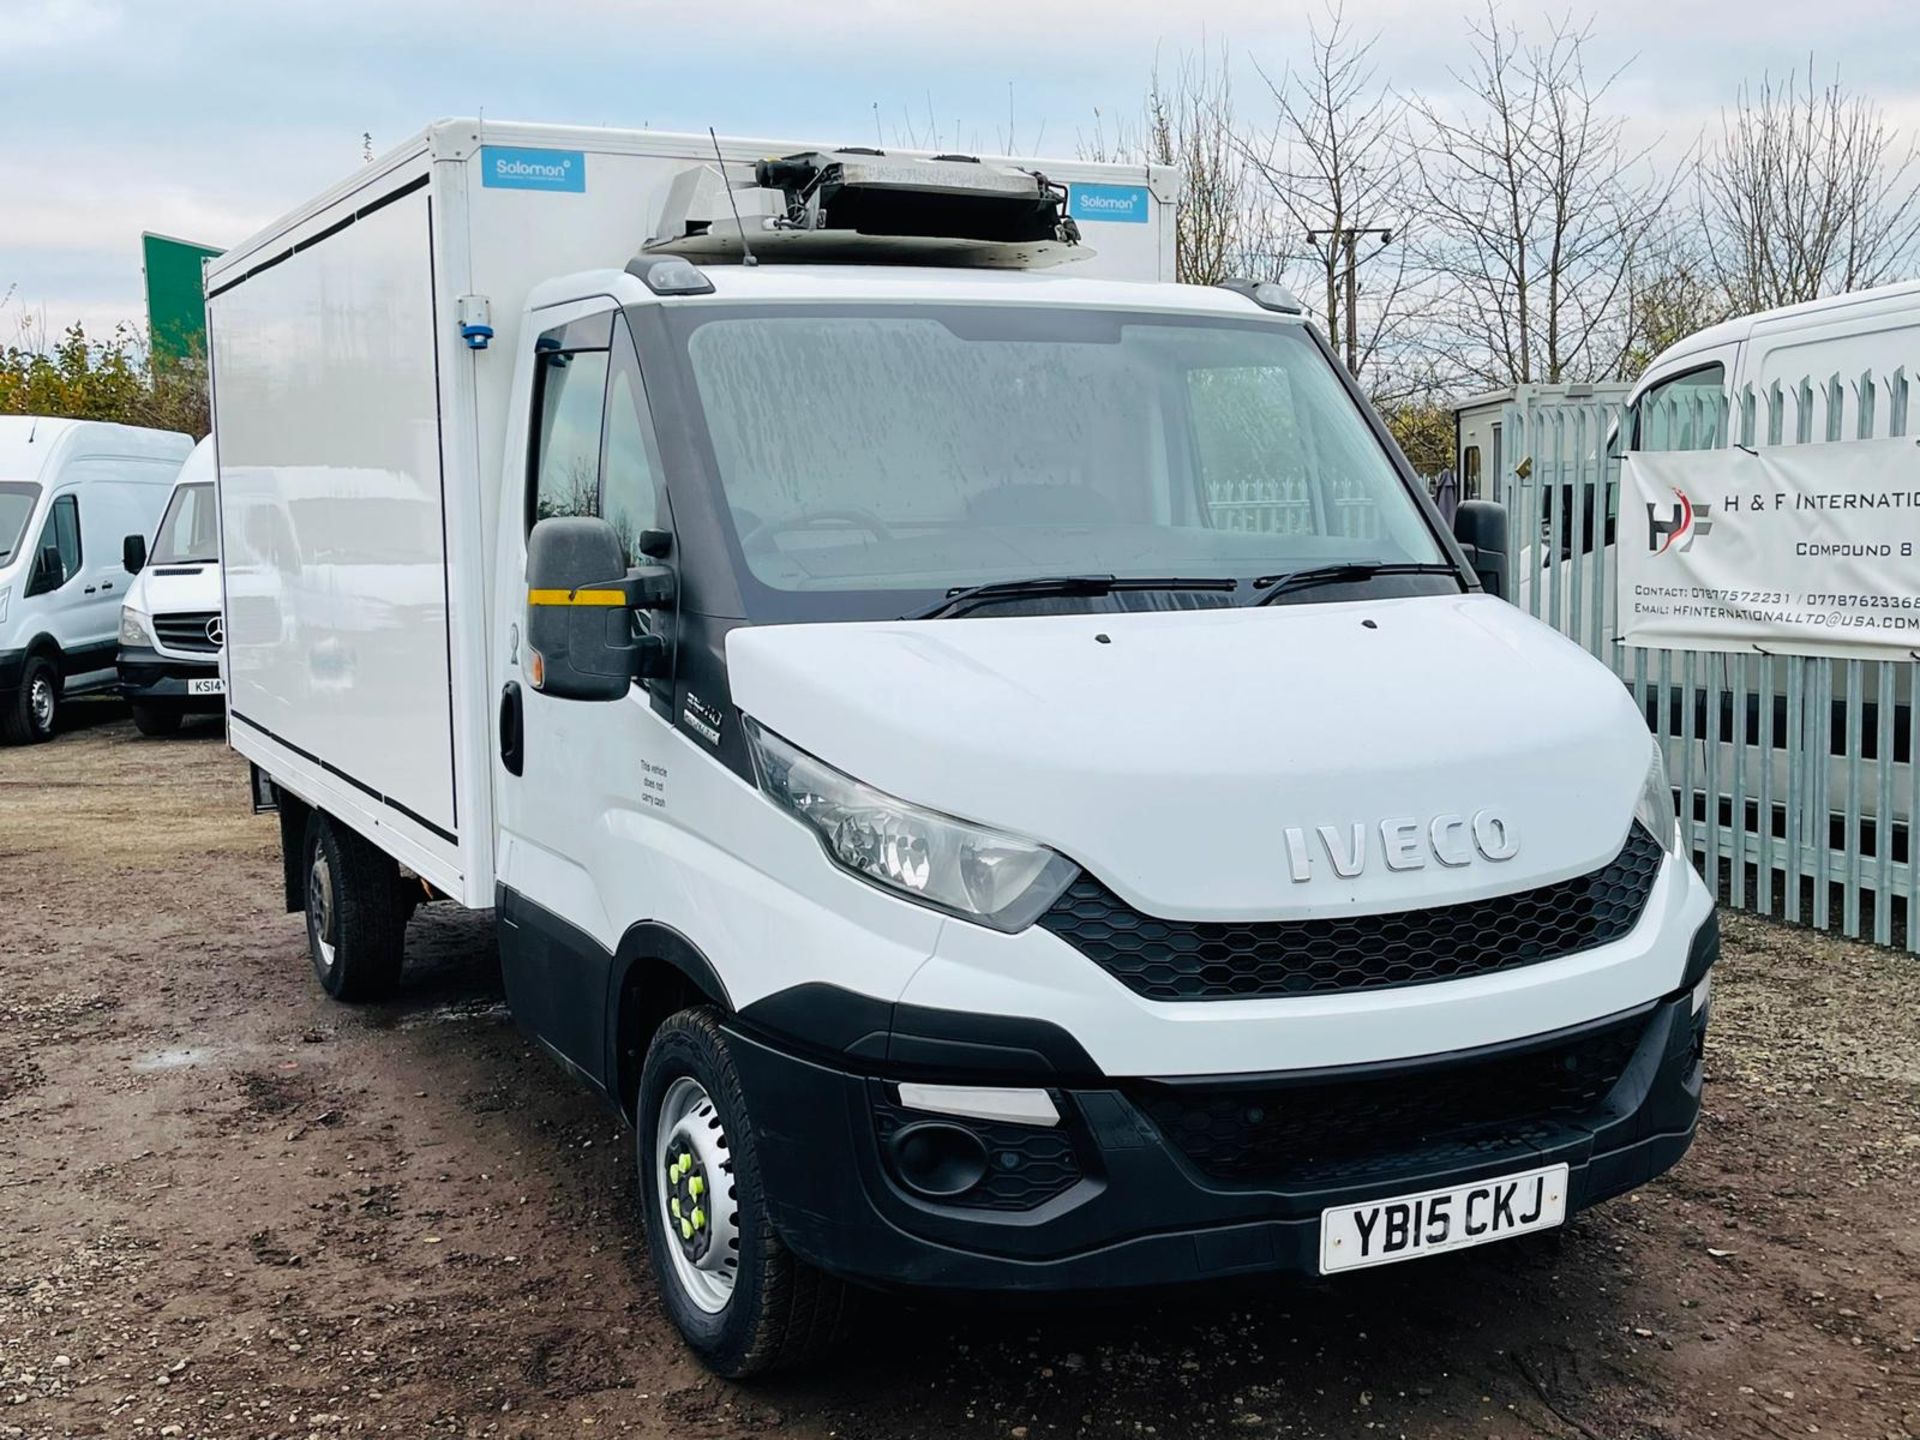 ** ON SALE ** Iveco Daily 35S11 L2 2.3 HPI **Automatic** 105 Bhp 2015 '15 Reg' GAH Fridge - - Image 3 of 23